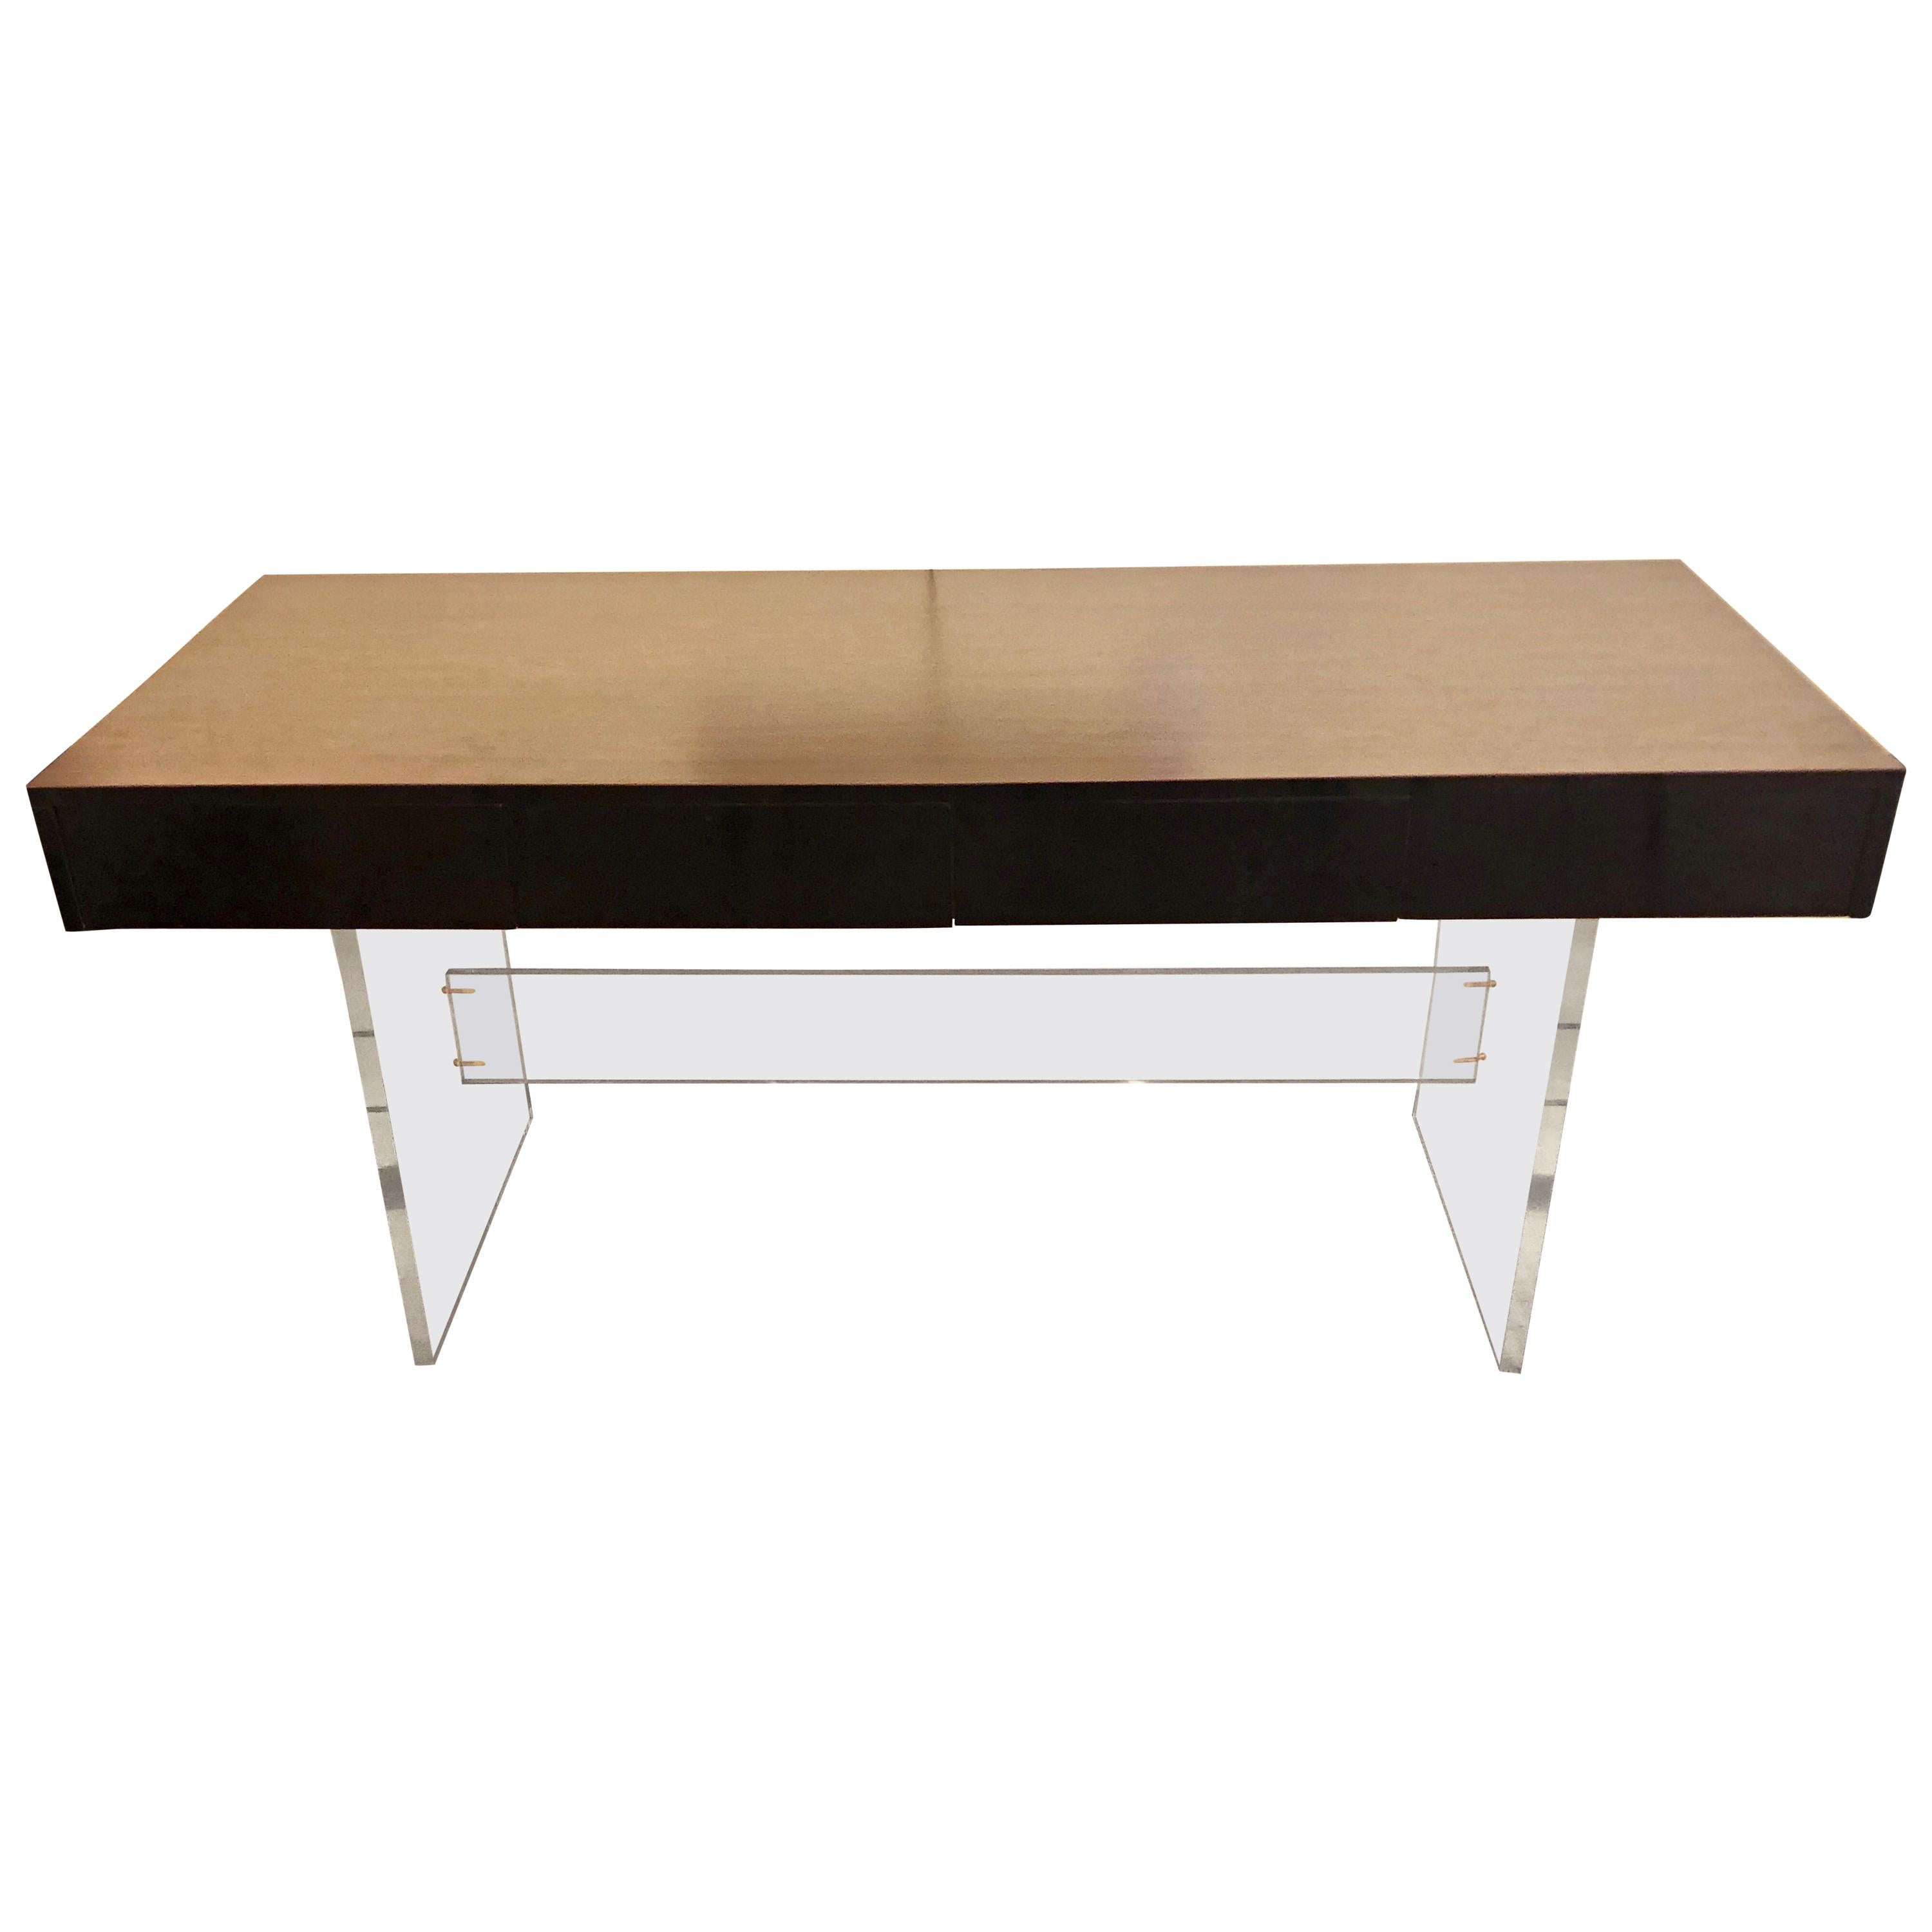 Rosewood Top Ebony Apron and Lucite Support Desk Writing Table